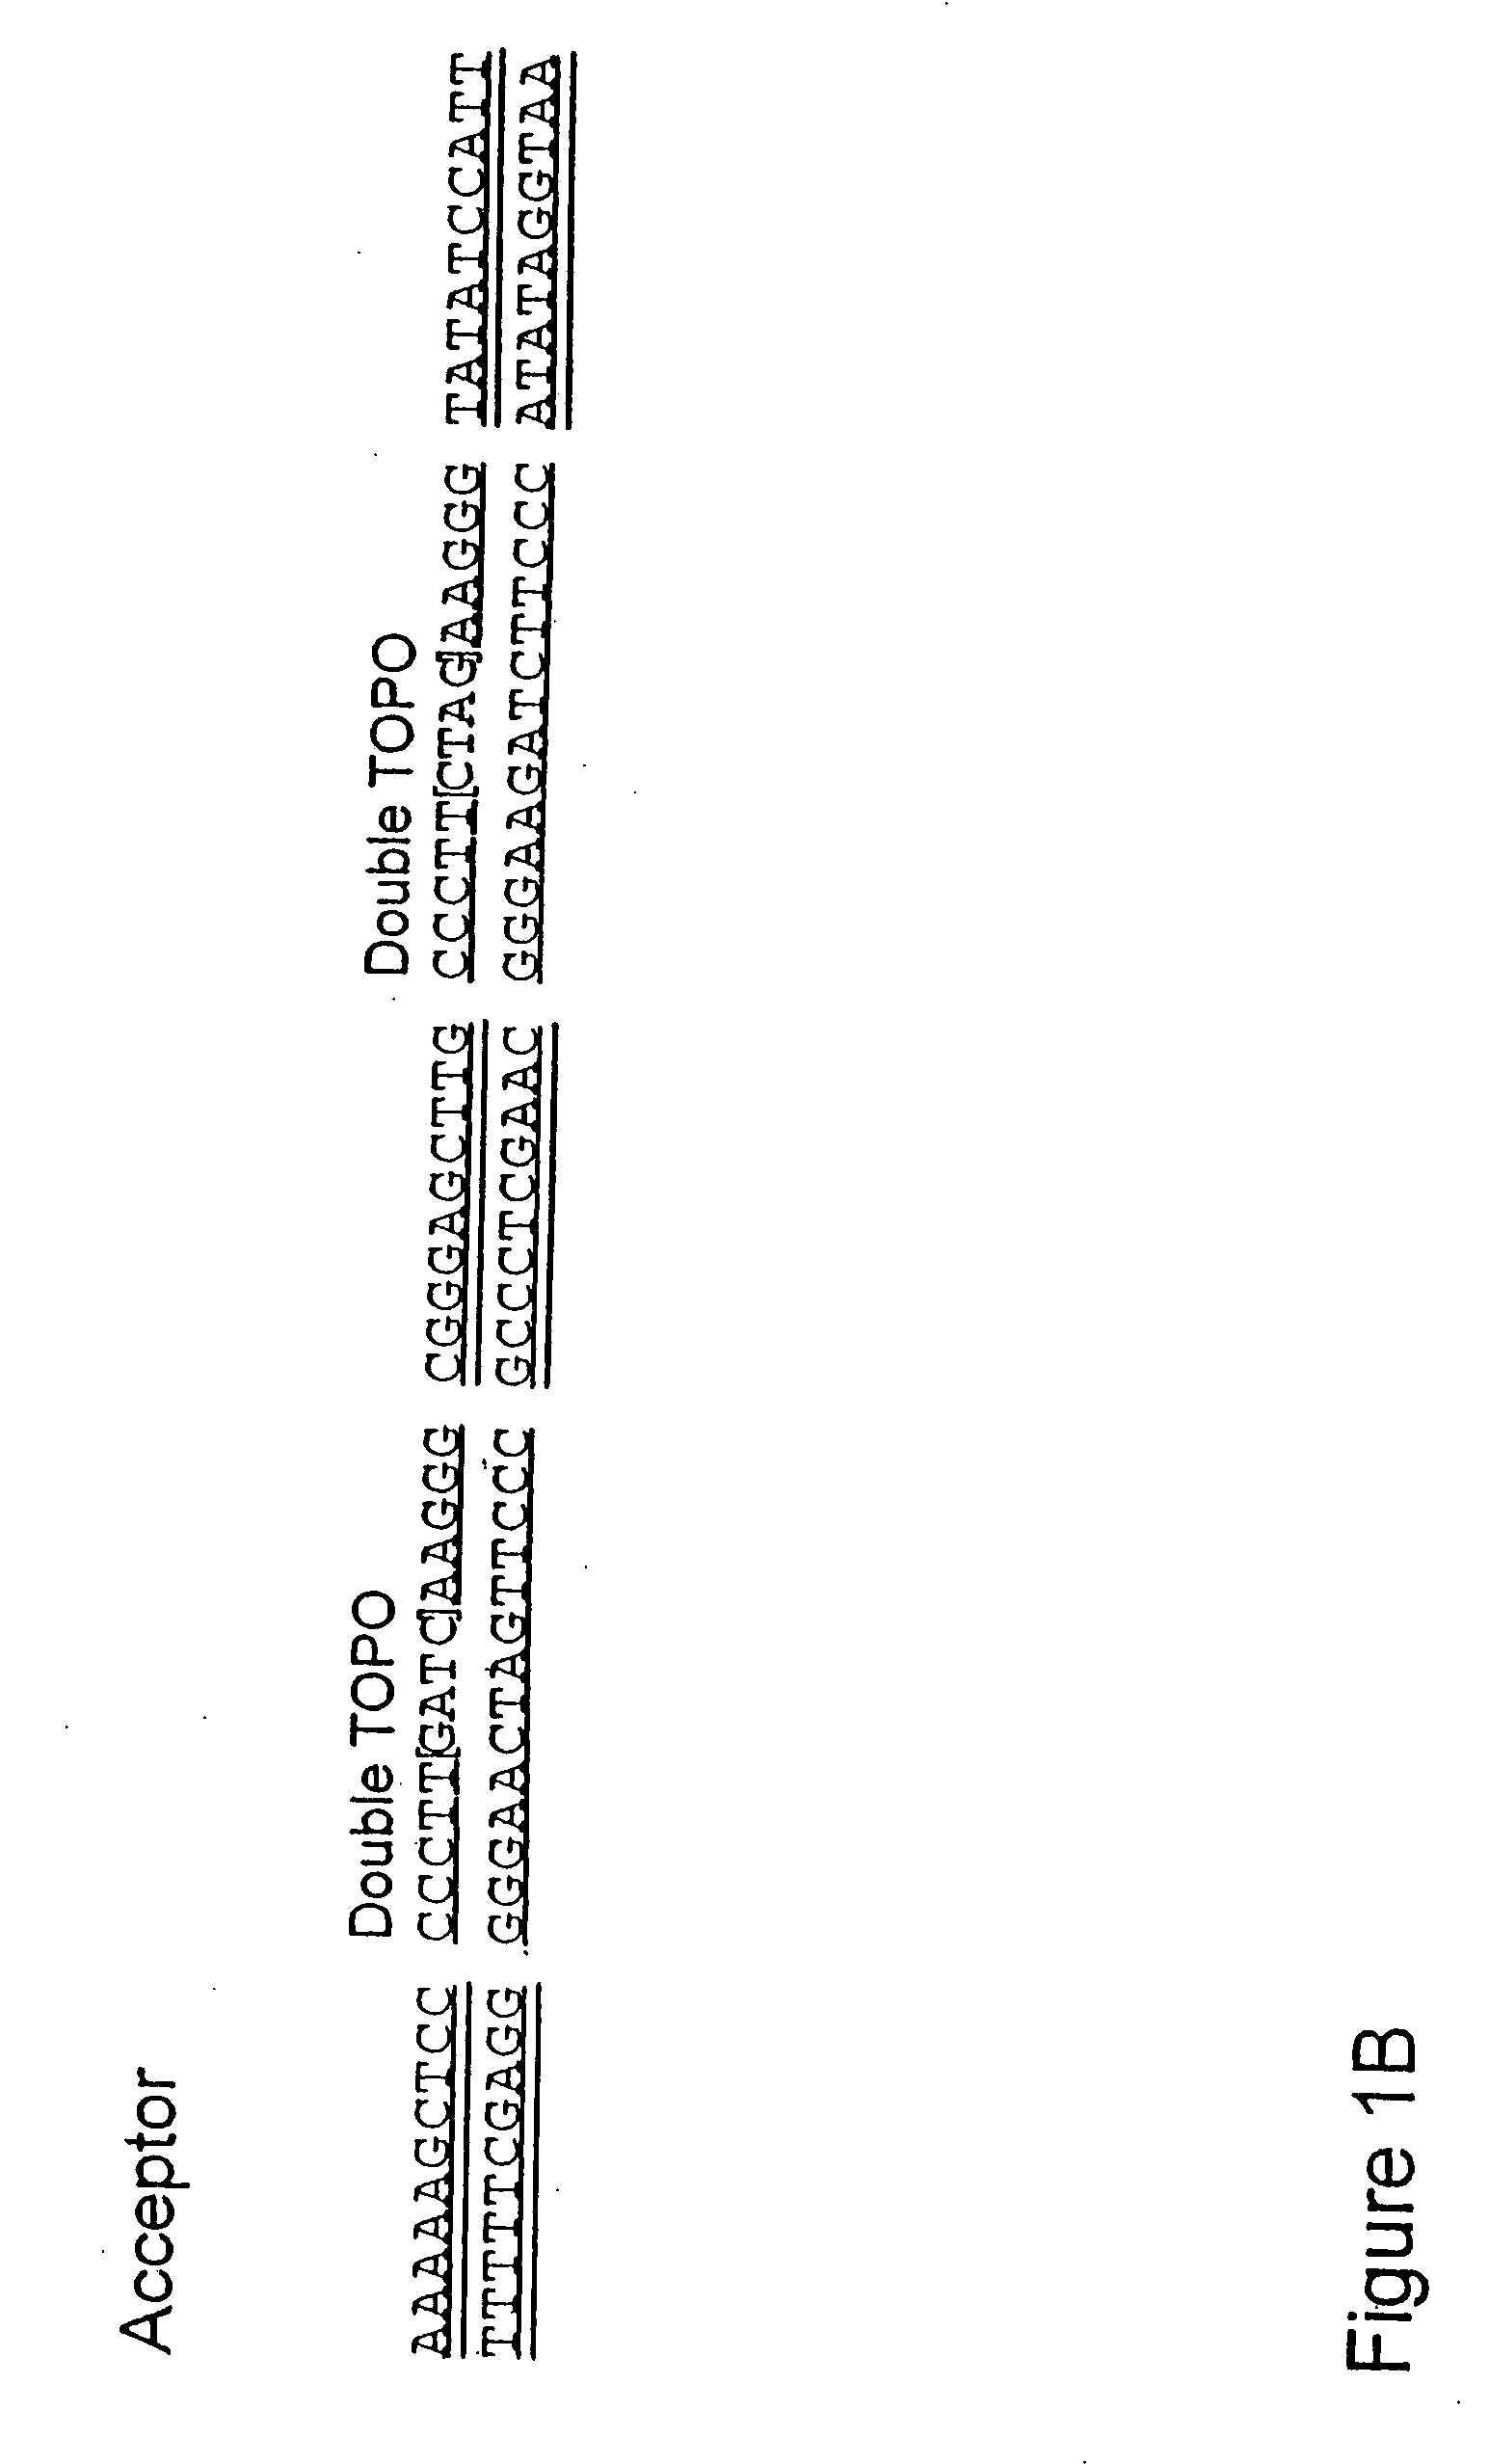 System for the rapid manipulation of nuculeic acid sequences